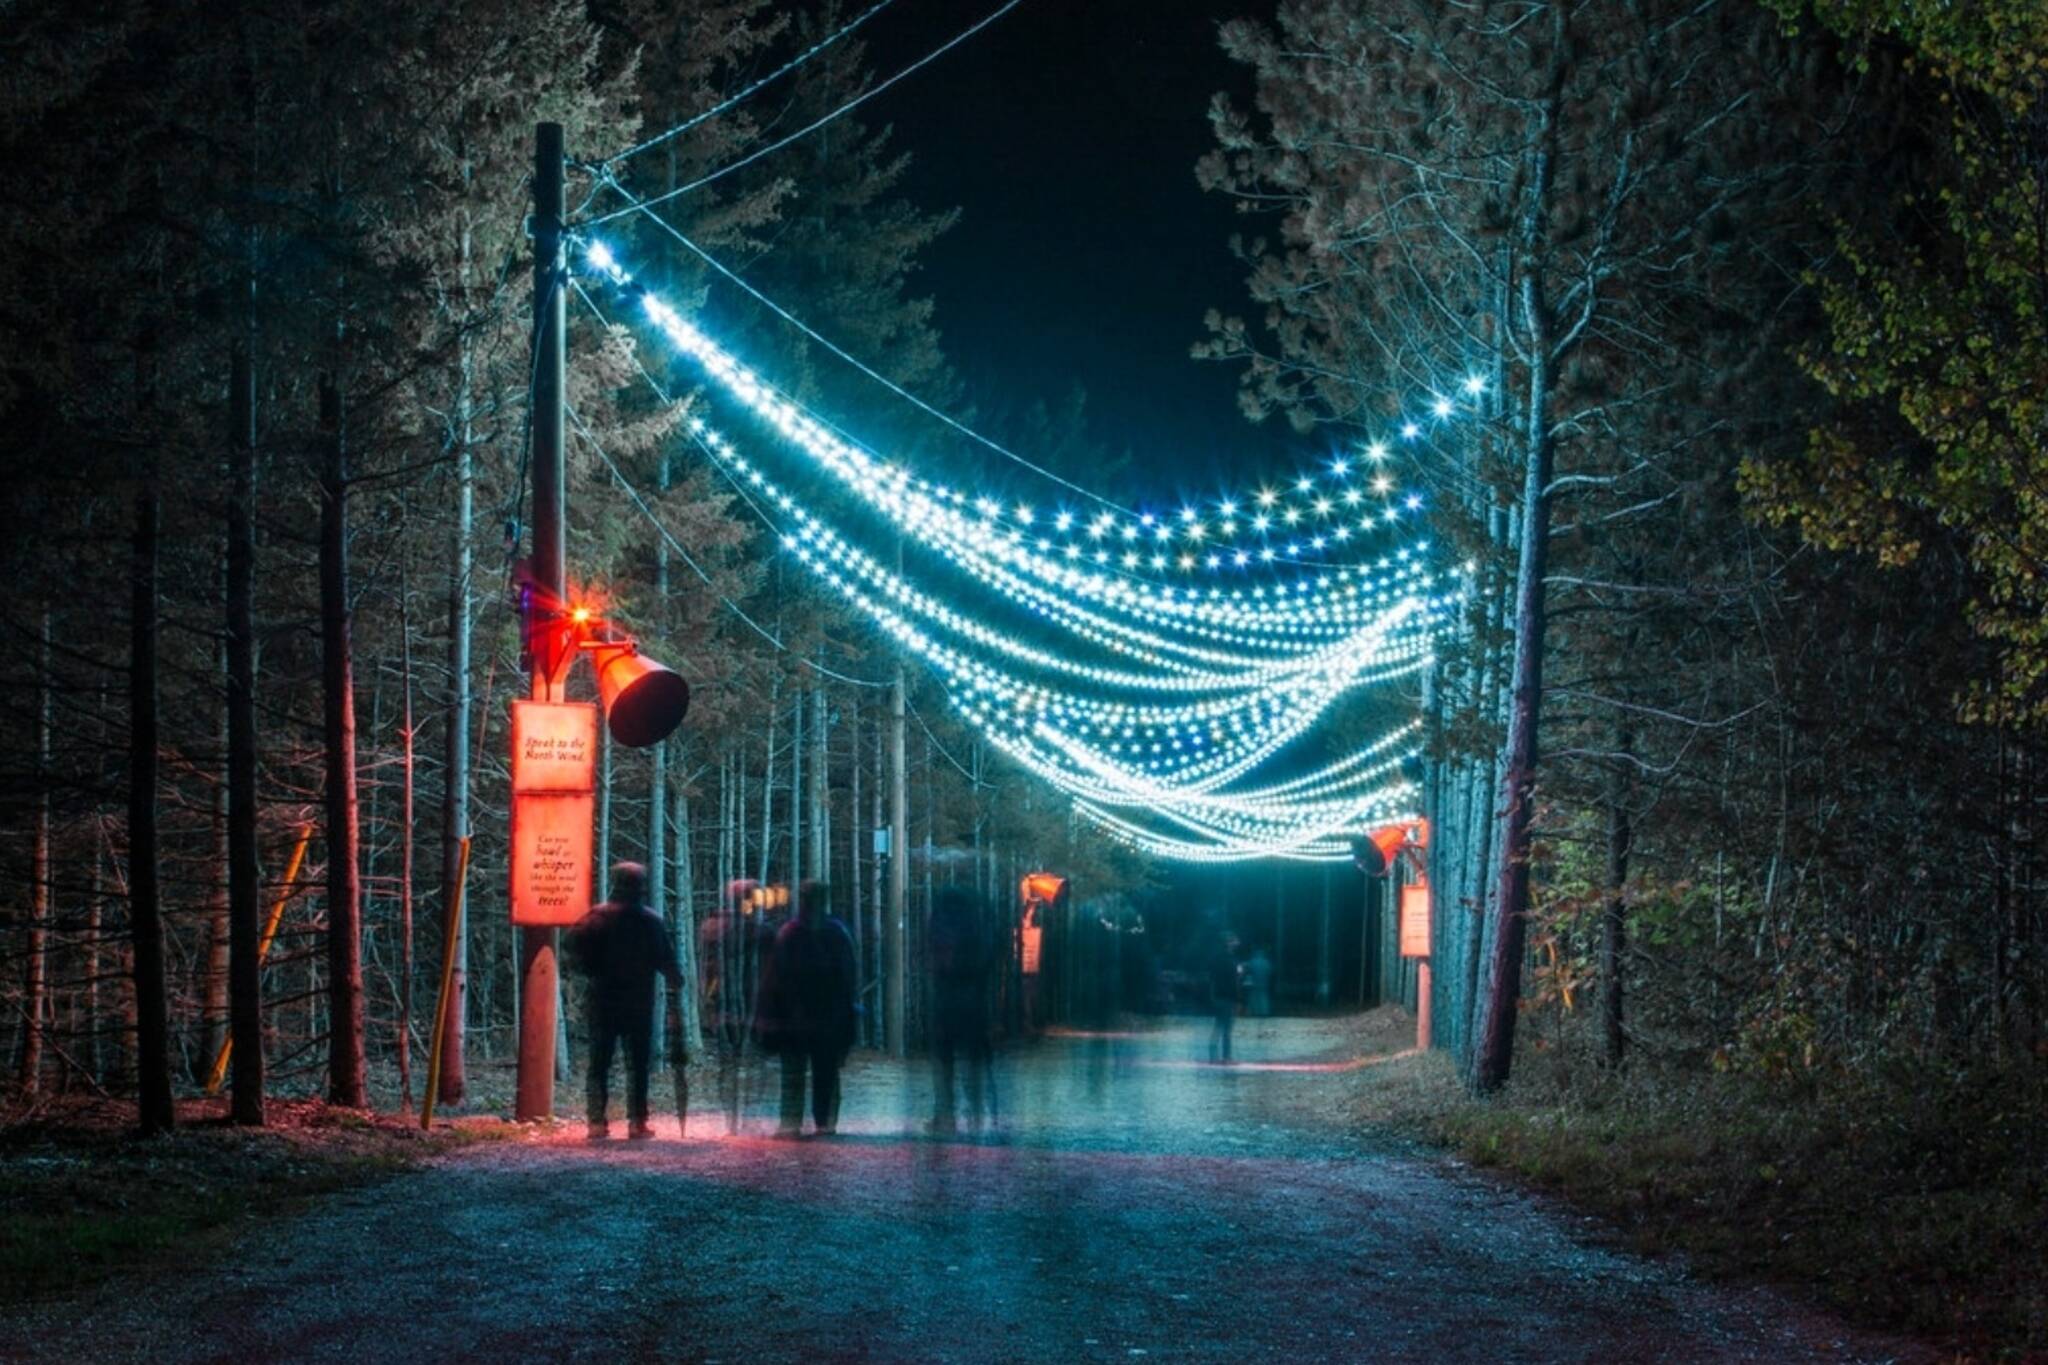 There's a magical trail covered in holiday lights near Toronto